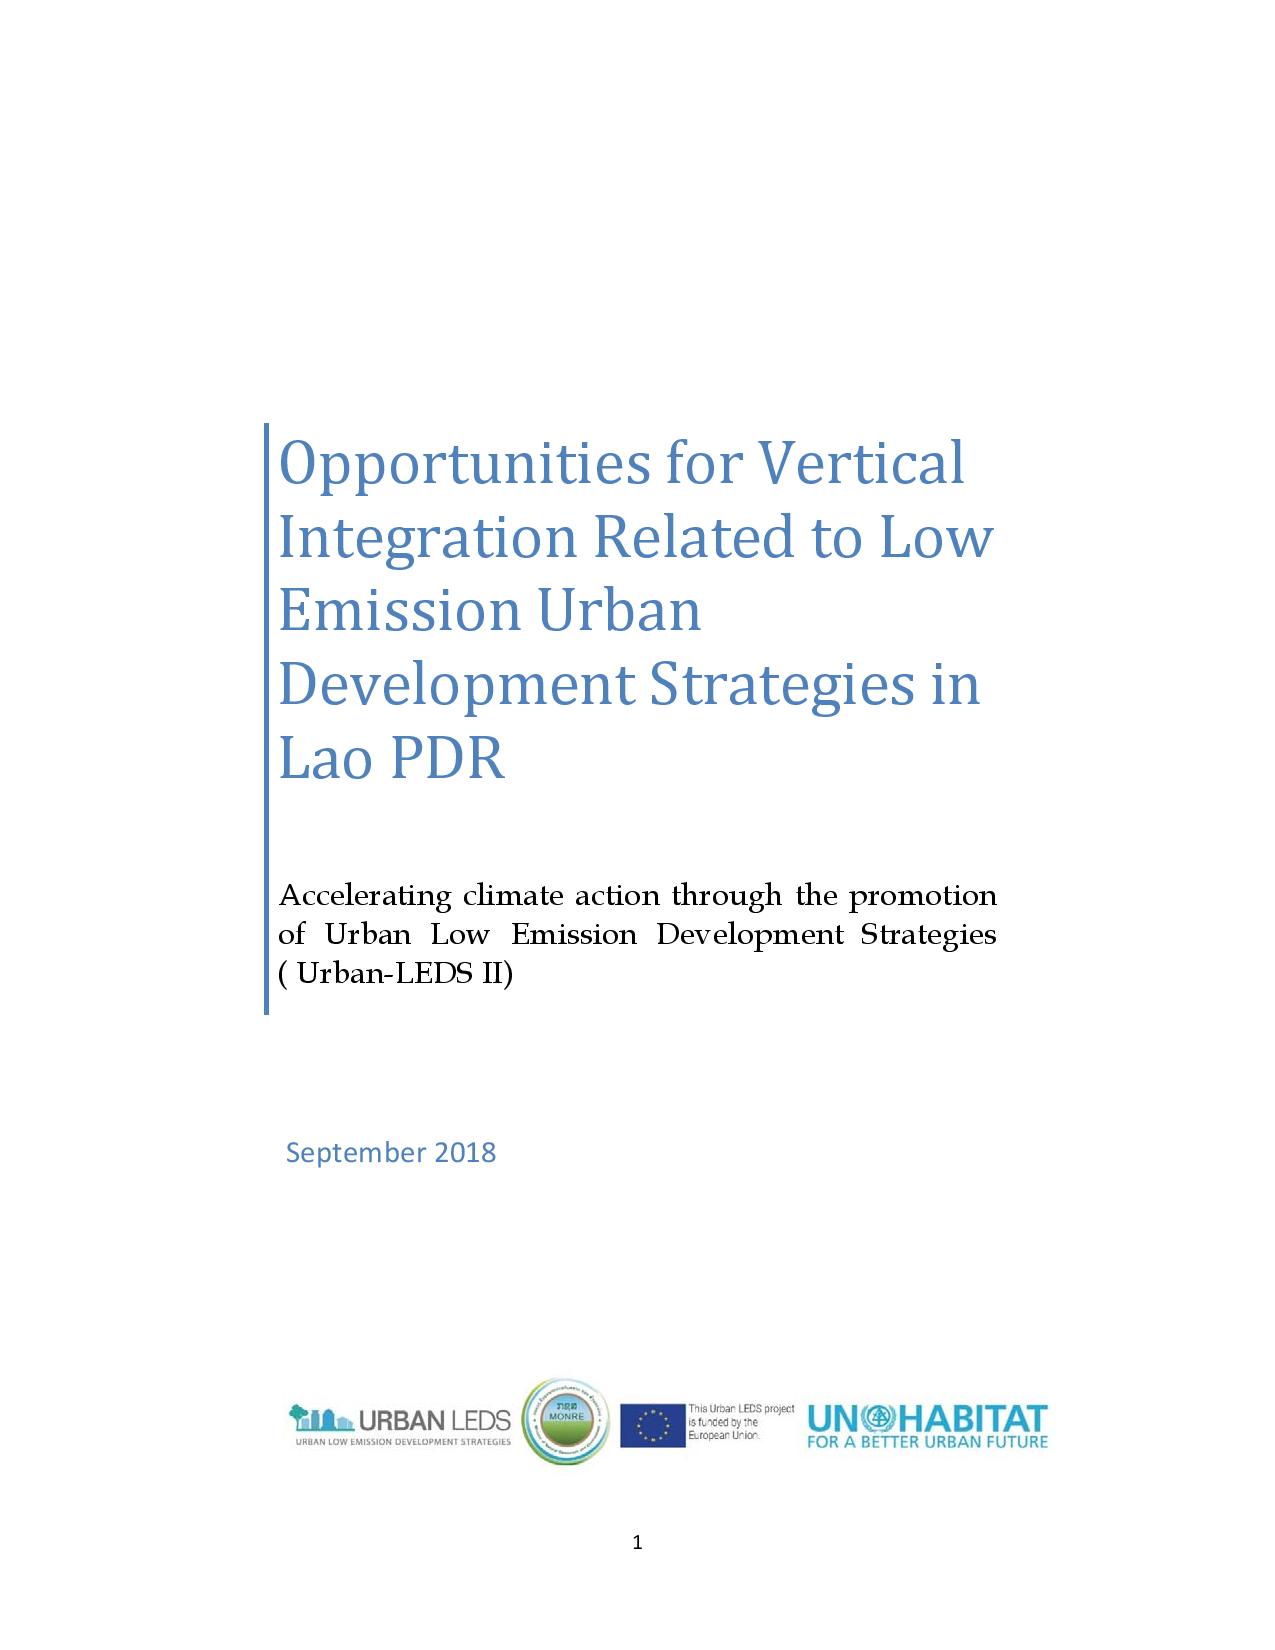 Opportunities for Vertical Integration Related to Low Emission Urban Development Strategies in Lao PDR (2018)